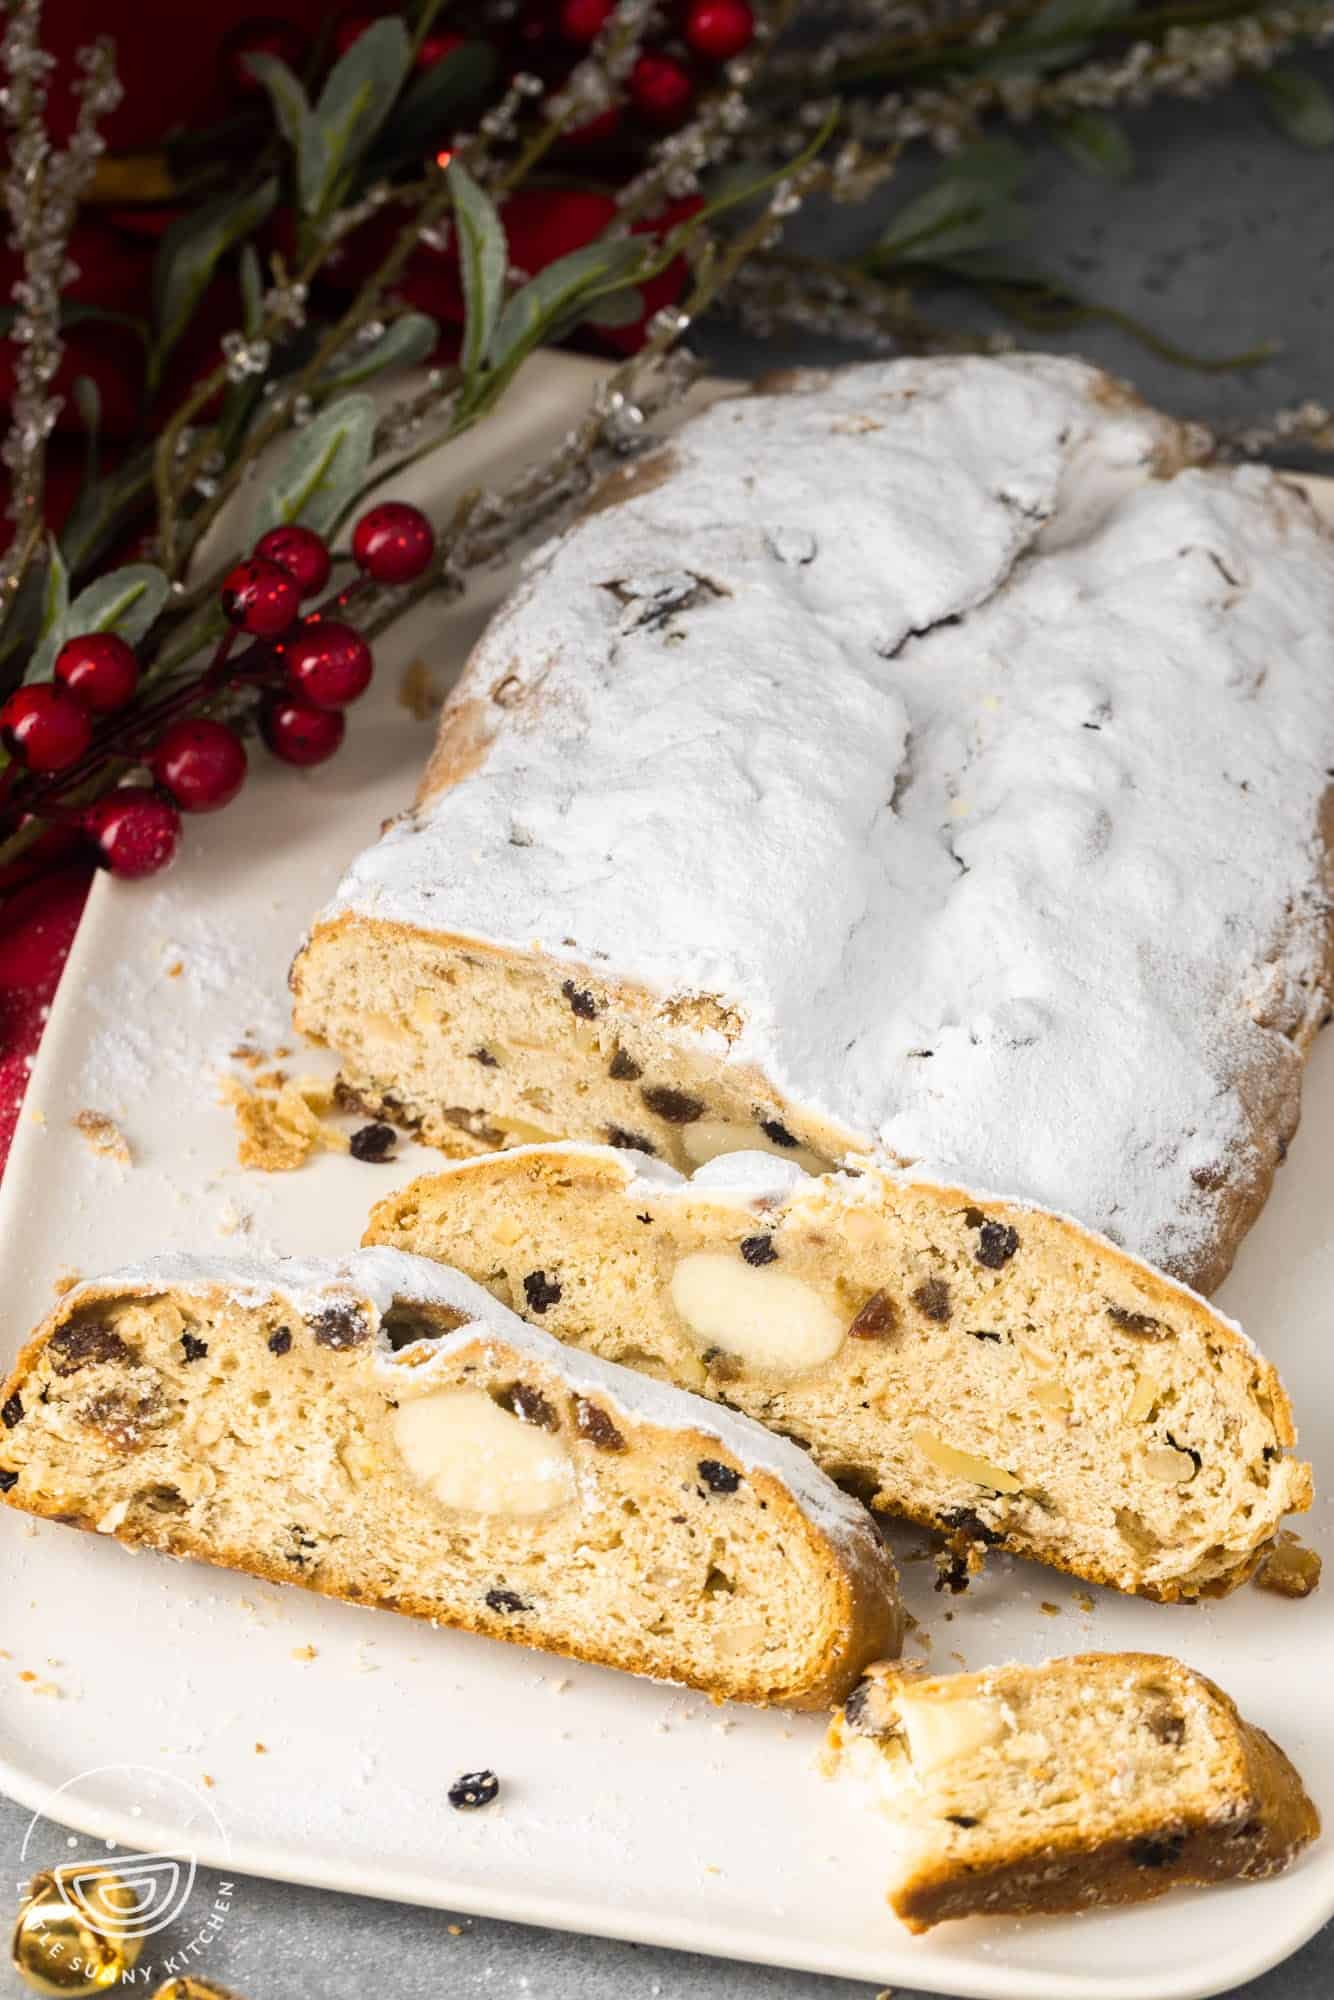 a loaf of stollen bread, dusted heavily with powdered sugar, on a white platter. The loaf is sliced, showing slices with raisins, nuts, and marzipan inside. 